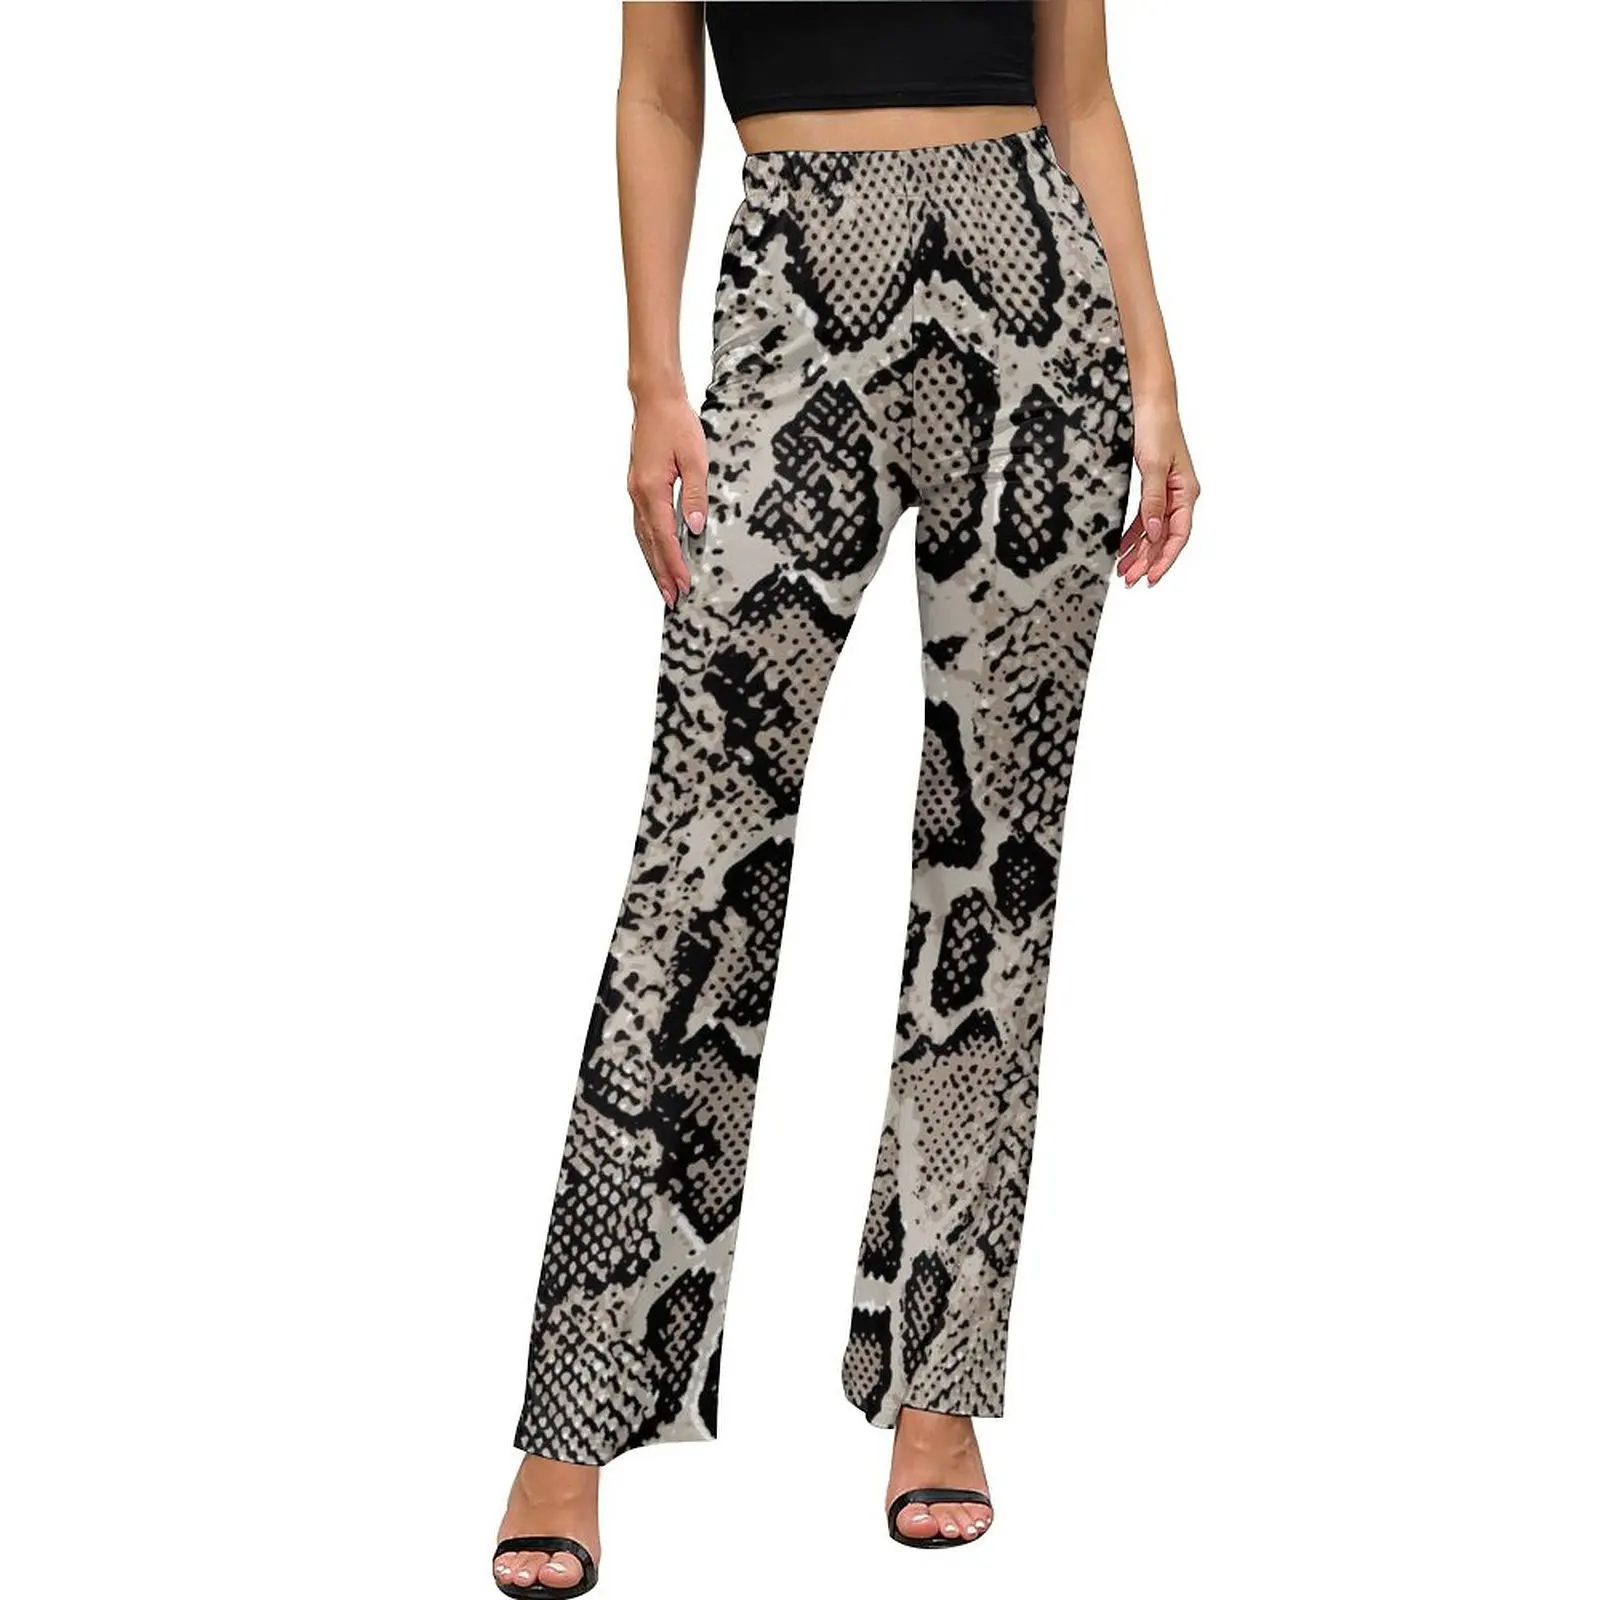 

Grey Snakeskin Pants High Waisted Animal Print Streetwear Flare Pants Summer Sexy Workout Graphic Big Size Trousers